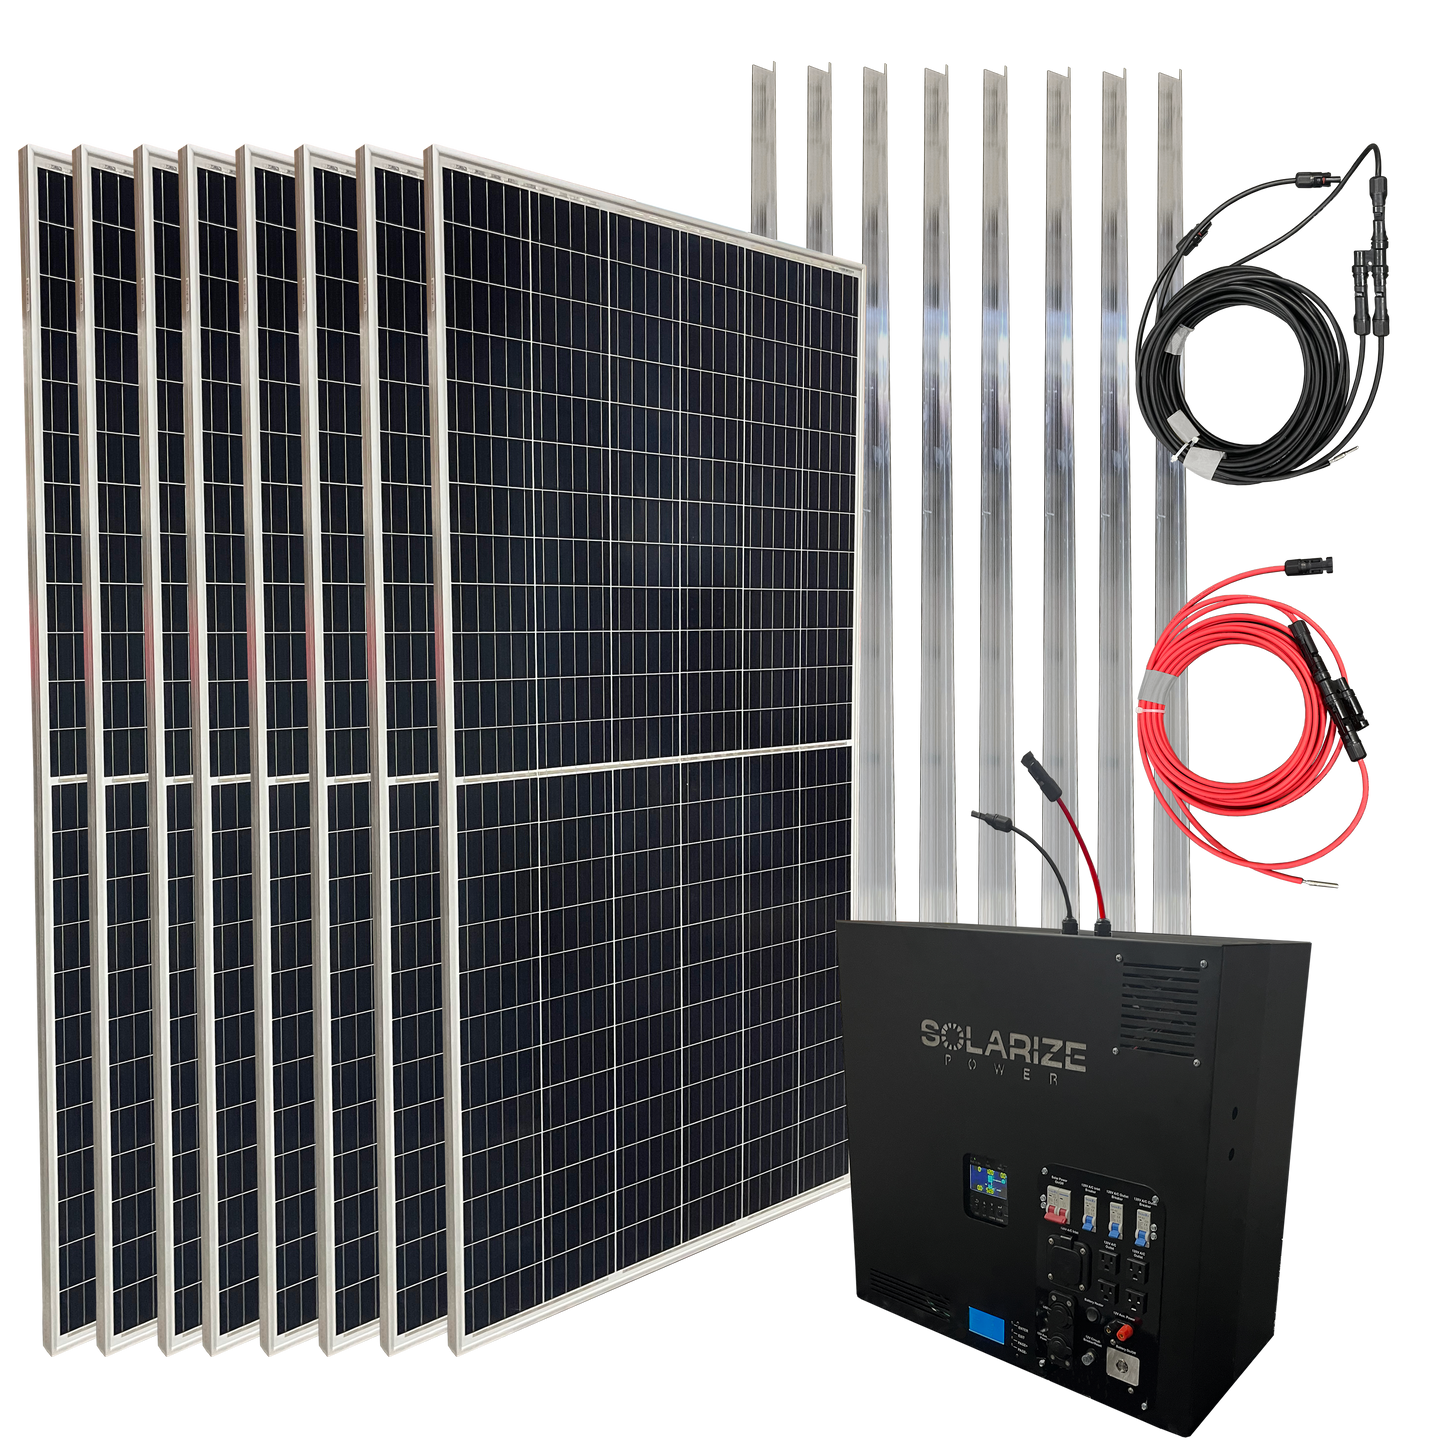 Trailer Solar Power System with 8 Solar Panels (full package: 8 Solar Panels, Cabinet Generator Battery unit)